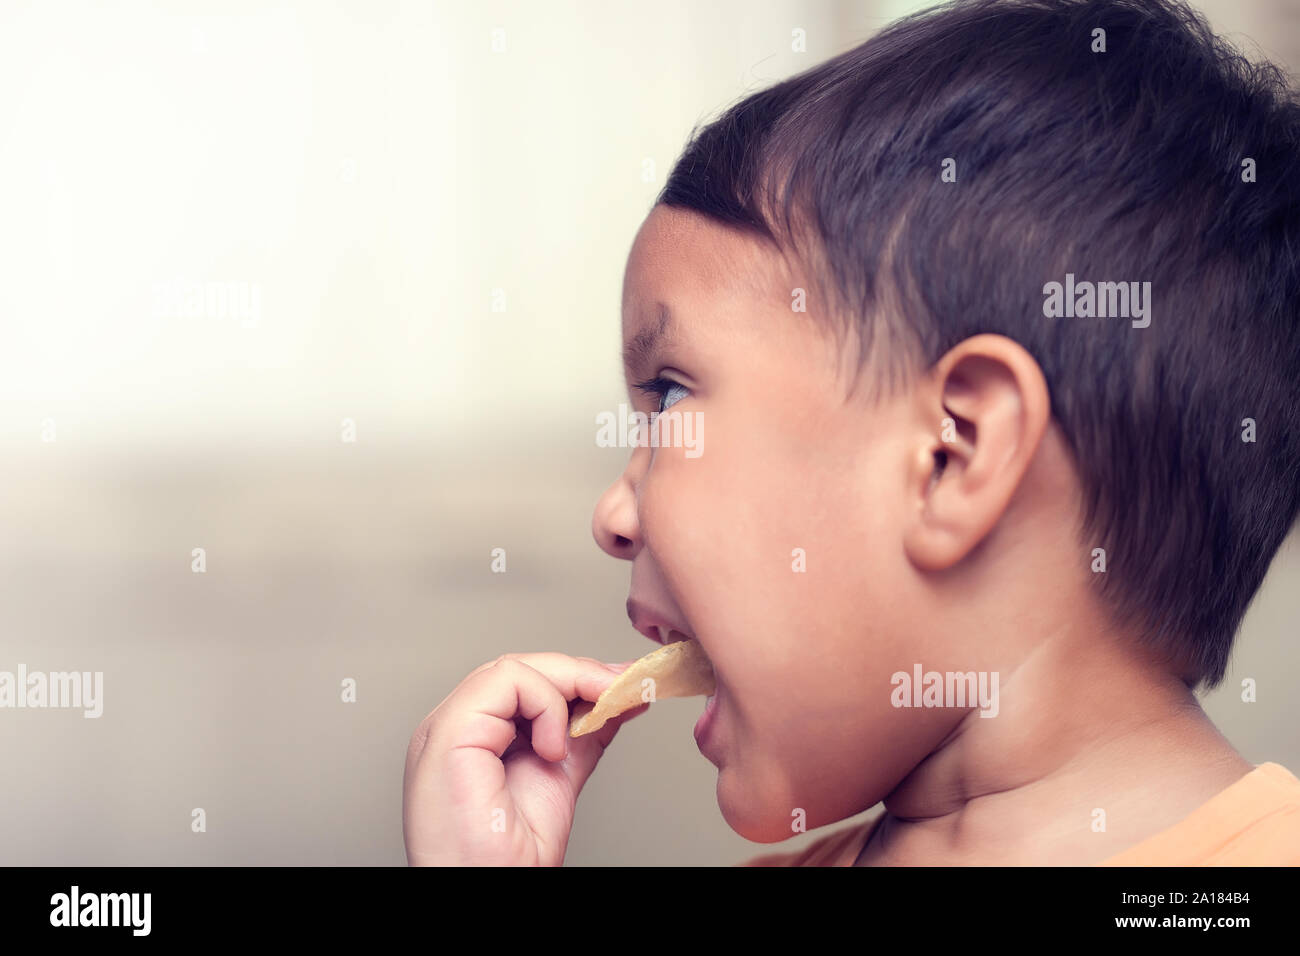 A kid forcibly putting a unhealthy potato chip snack in his mouth for eating while parents are away. Stock Photo